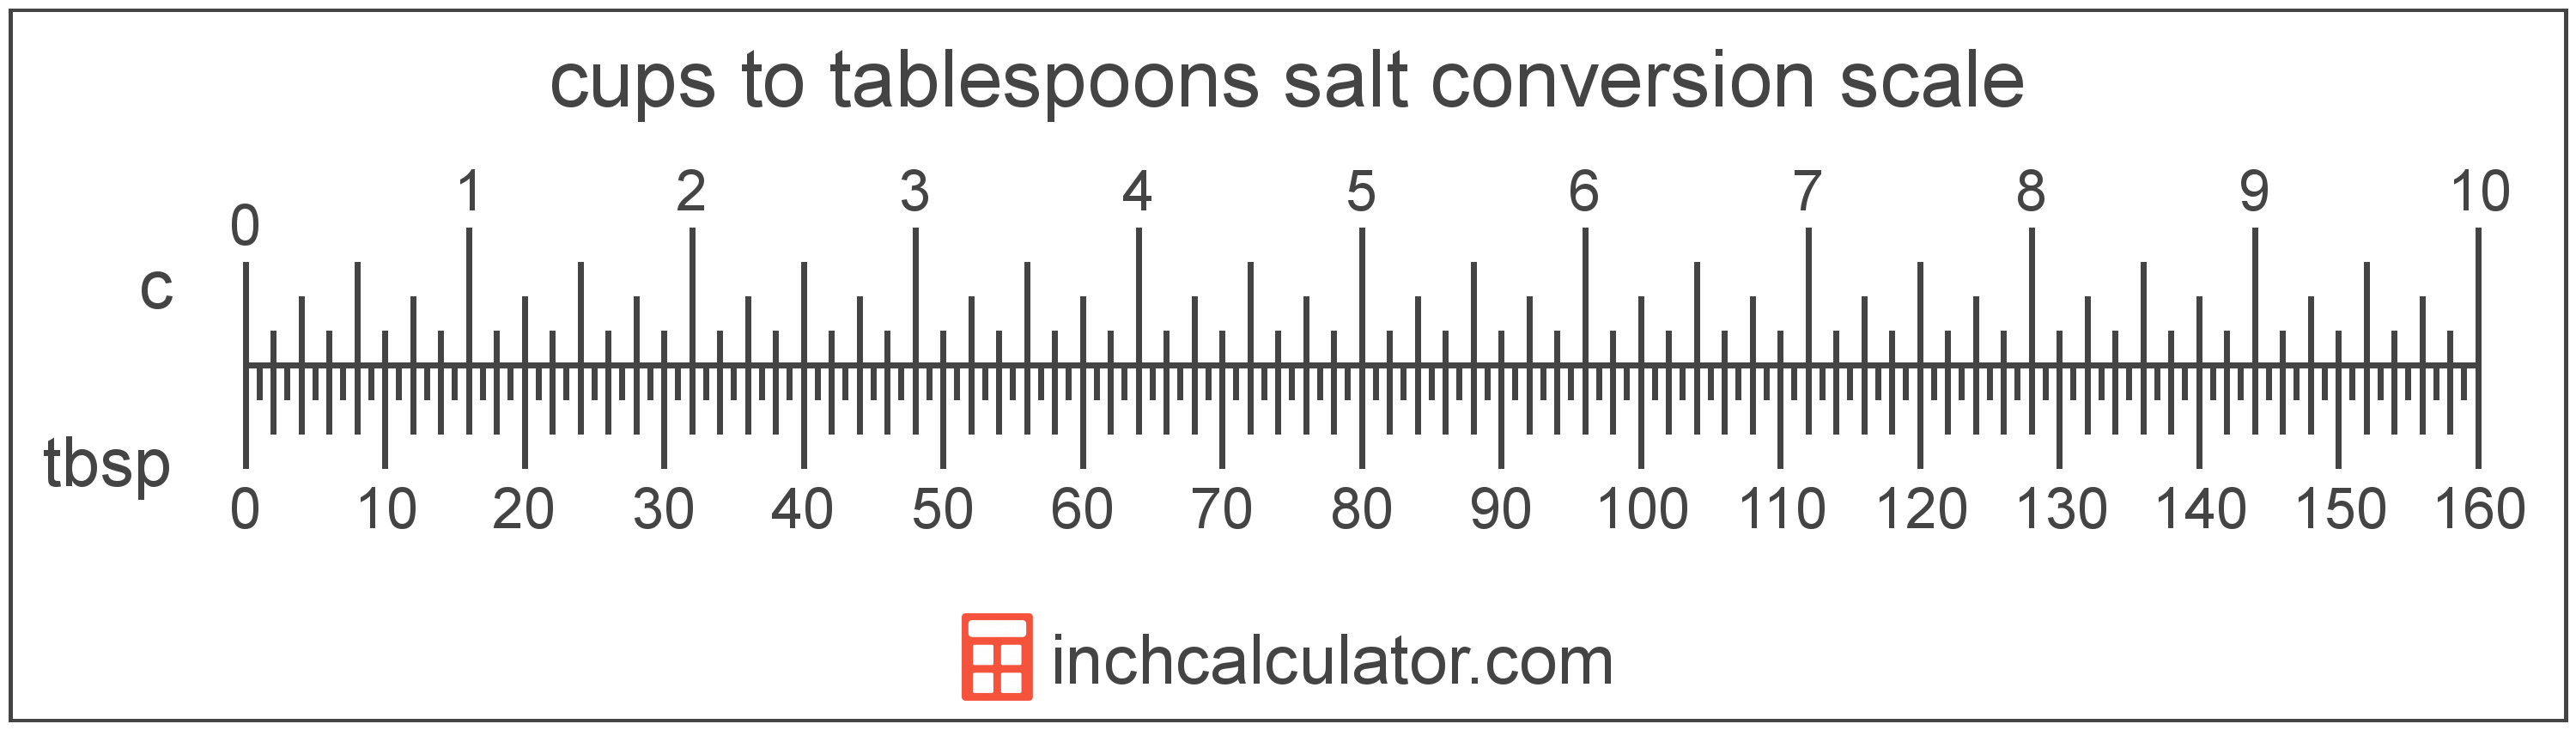 conversion scale showing cups and equivalent tablespoons salt volume values